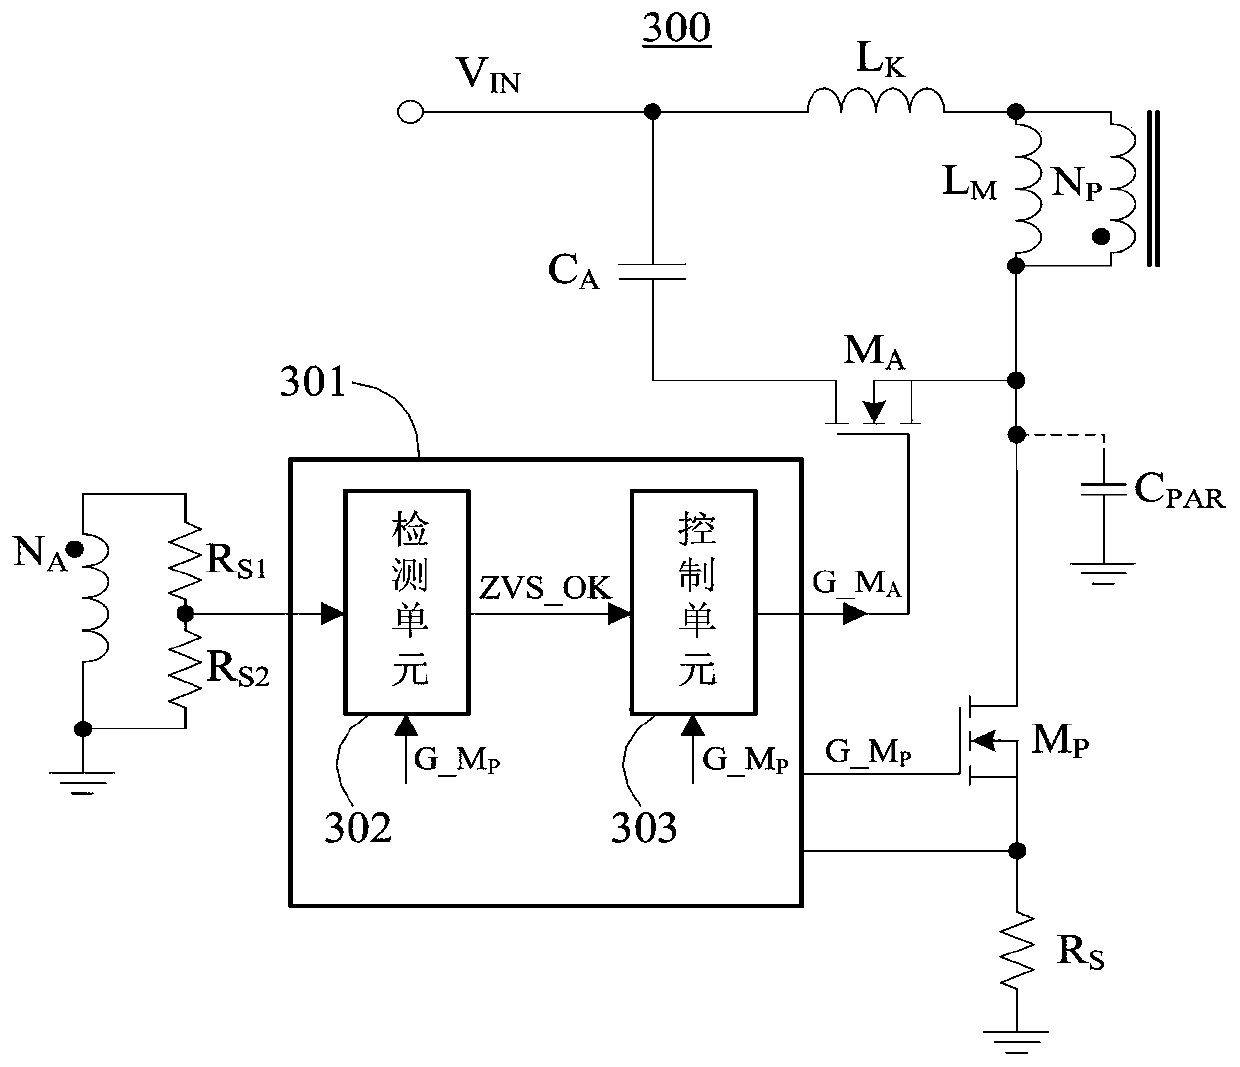 A method and circuit for adaptive control of active clamp flyback converter